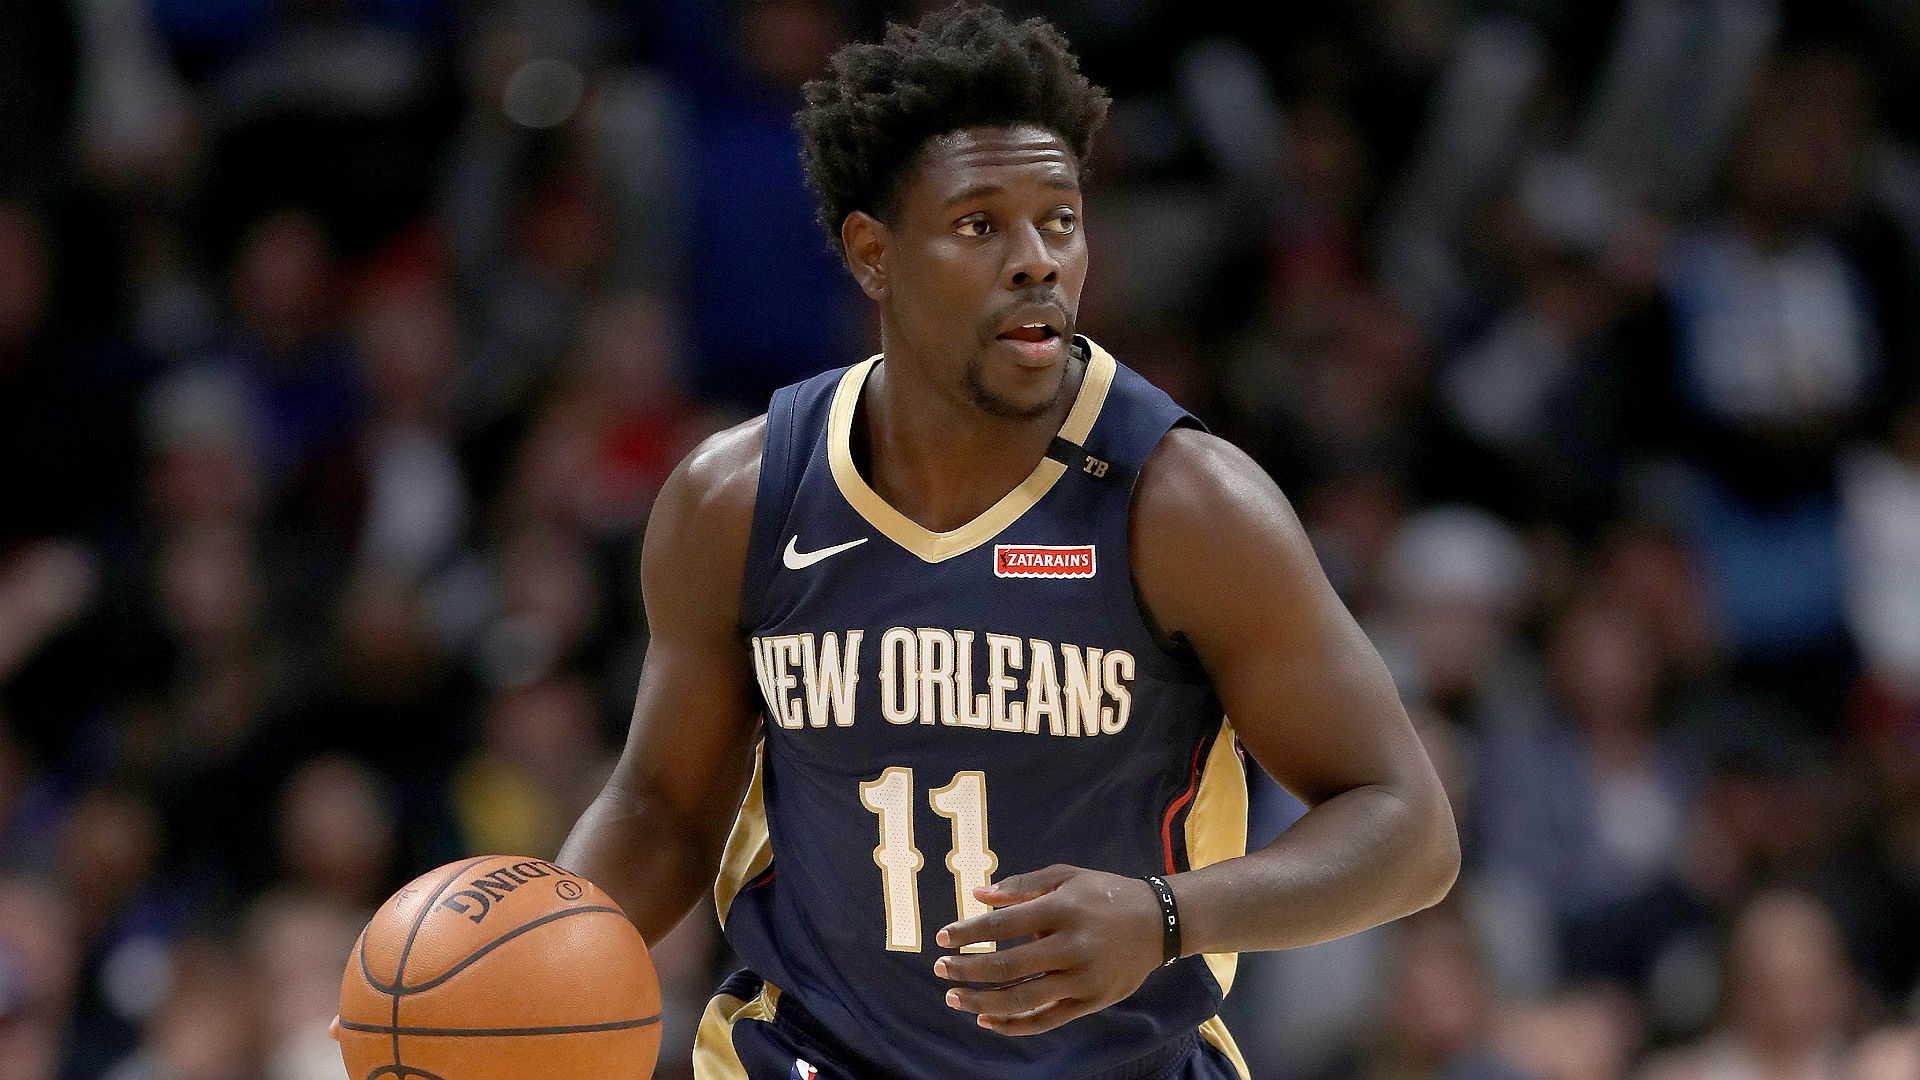 After an offseason of change, Jrue Holiday is ready for the New Orleans Pelicans' new campaign.